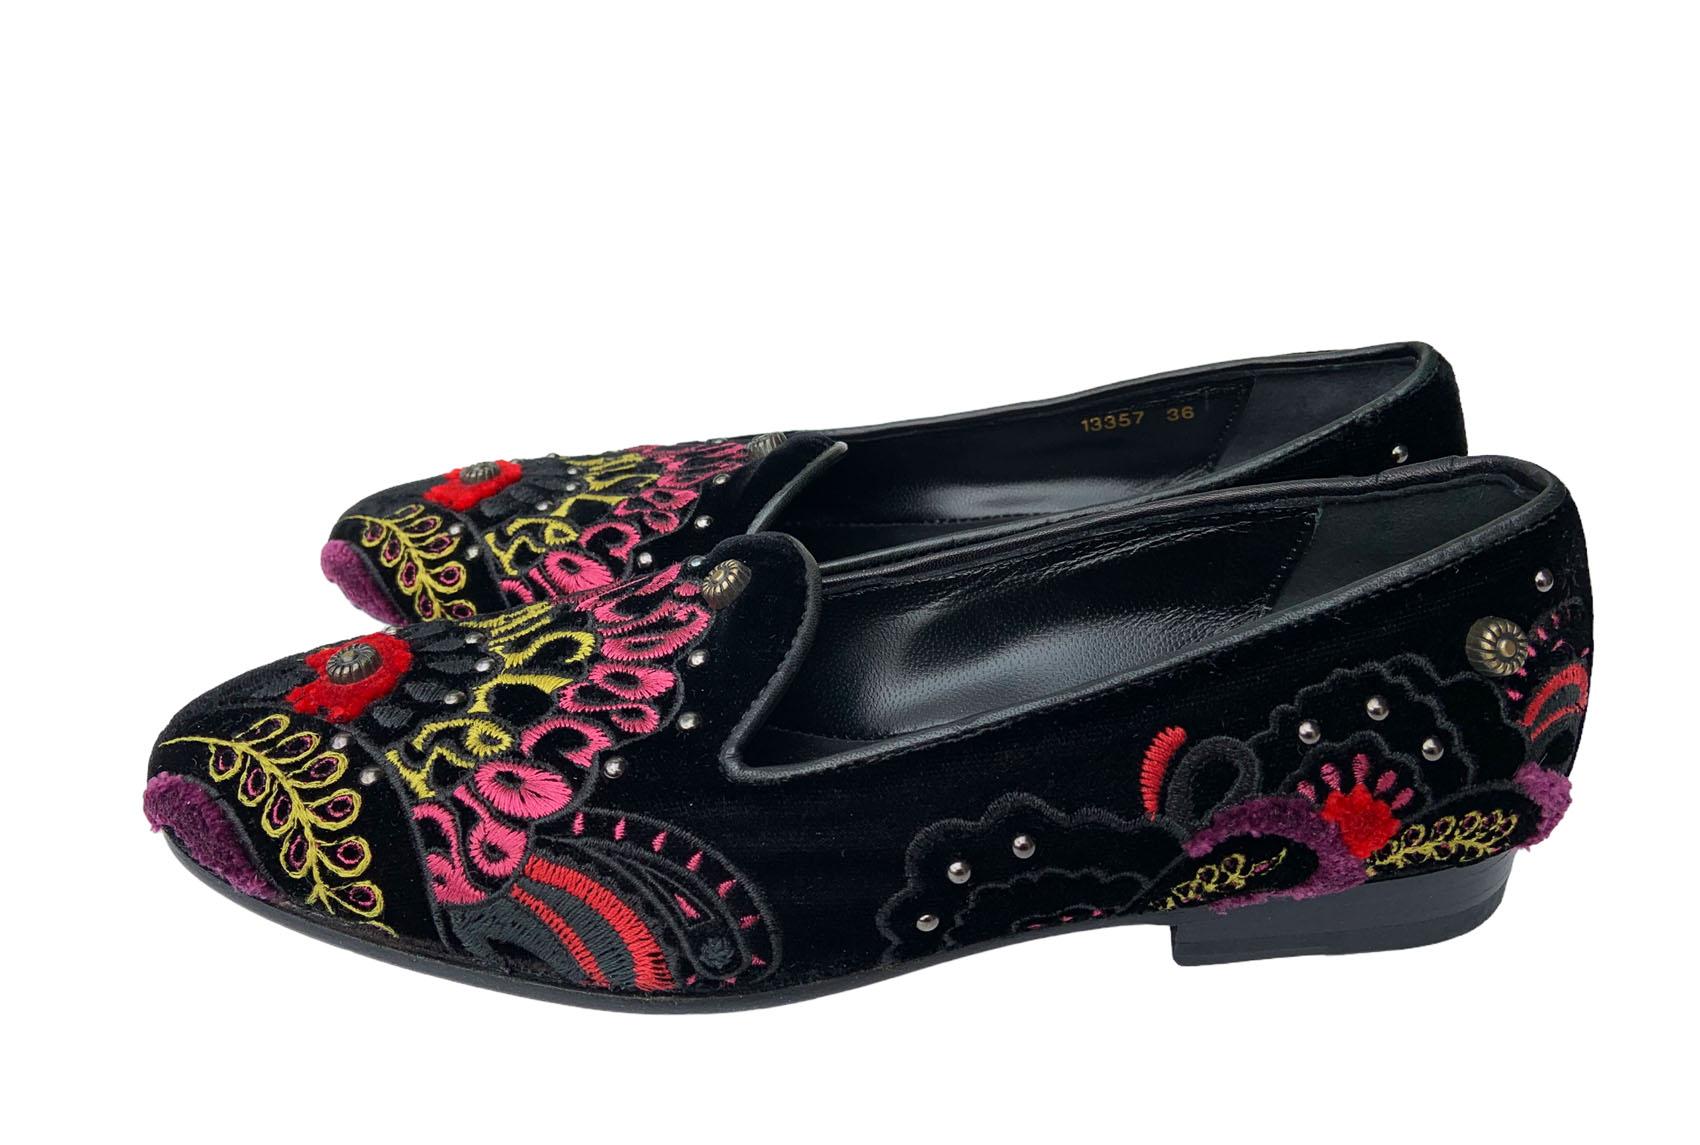 New Etro Black Velour Fully Embellished Flats Loafers
Italian size - 36
Black Velour Upper Fully Embroidered and Beaded, Leather Insole and Sole.
Embroidery on loafers says - The Kaleidoscope Paisley.
Stacked heel - 1.75 inches
Made in Italy.
New